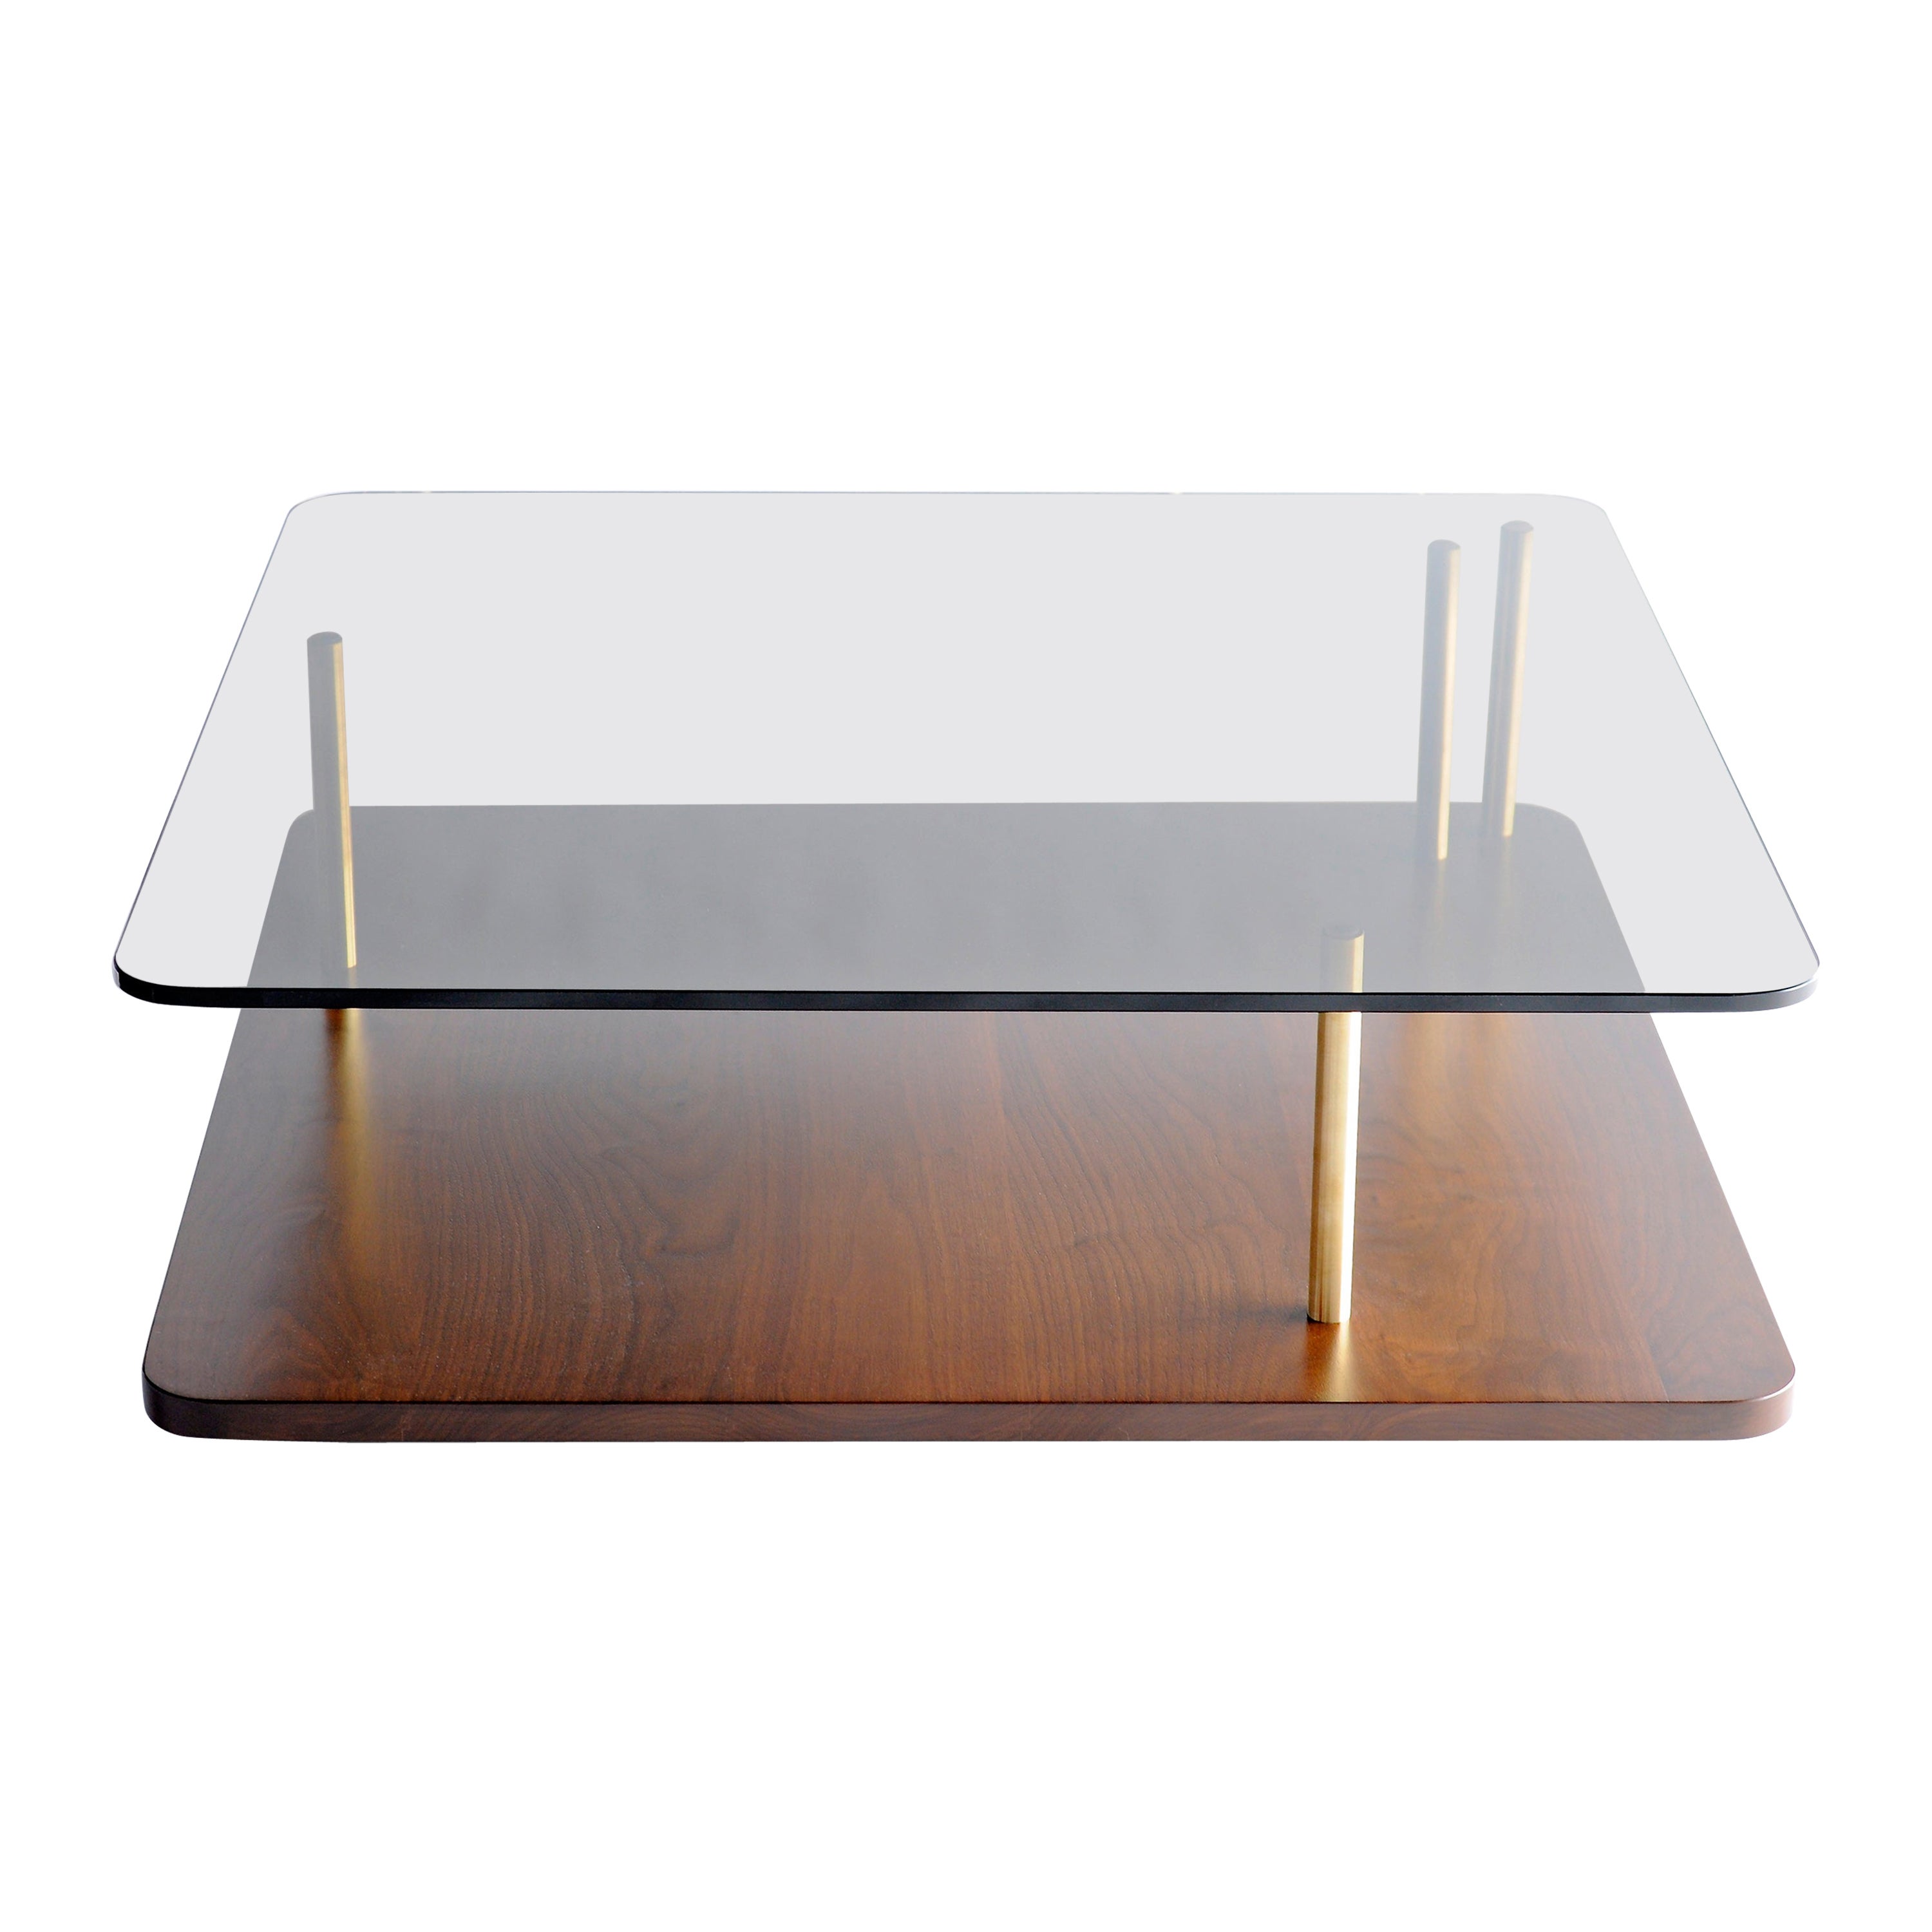 Points of Interest Square Coffee Table by Phase Design For Sale